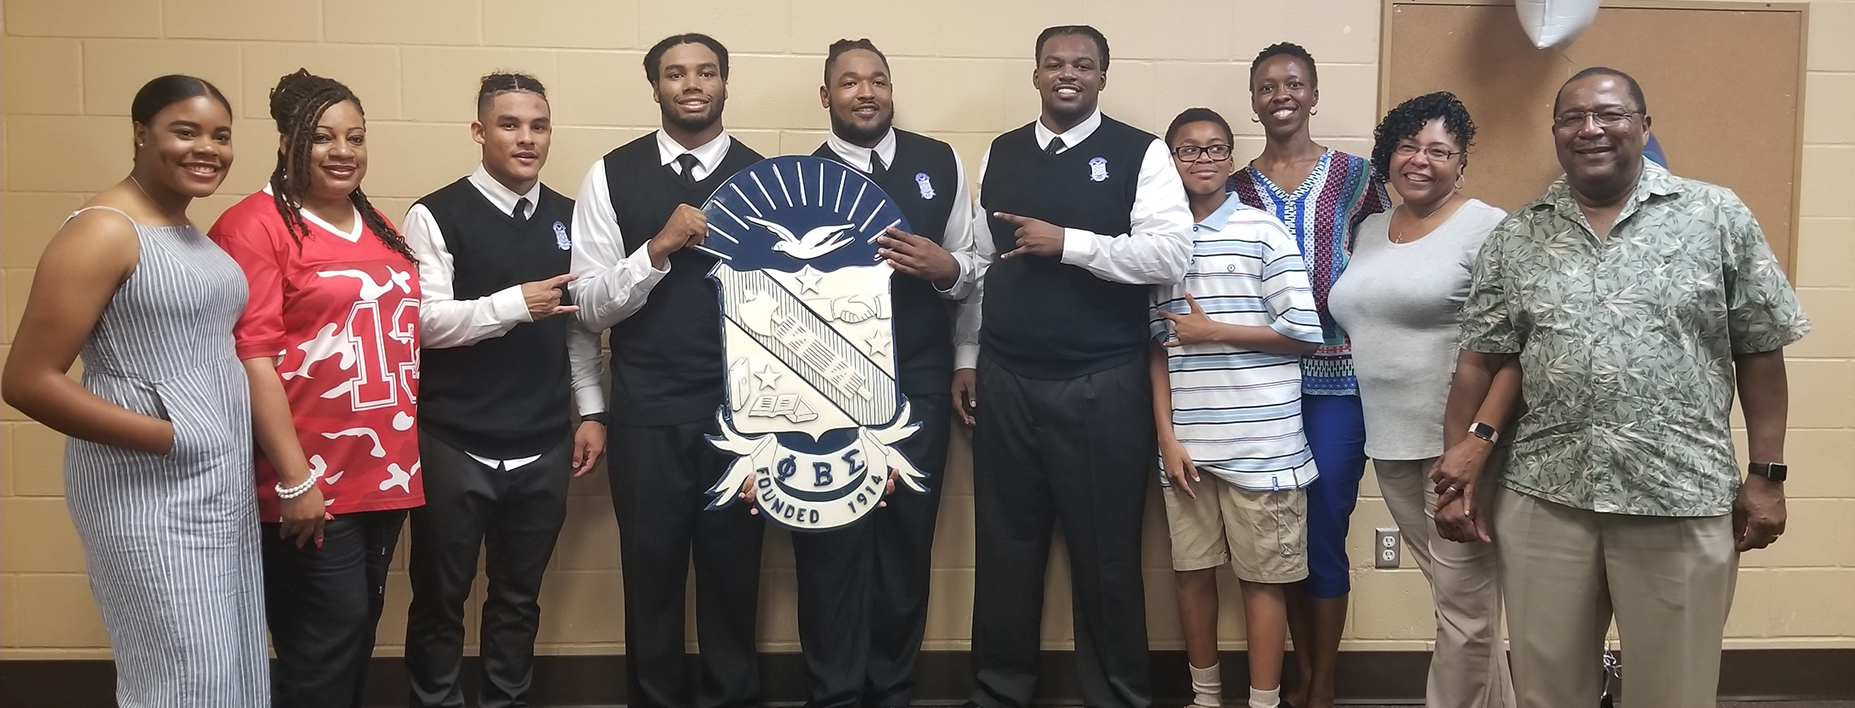 Long group shot of family with the four young men as they hold a banner with the fraterniy's crest.